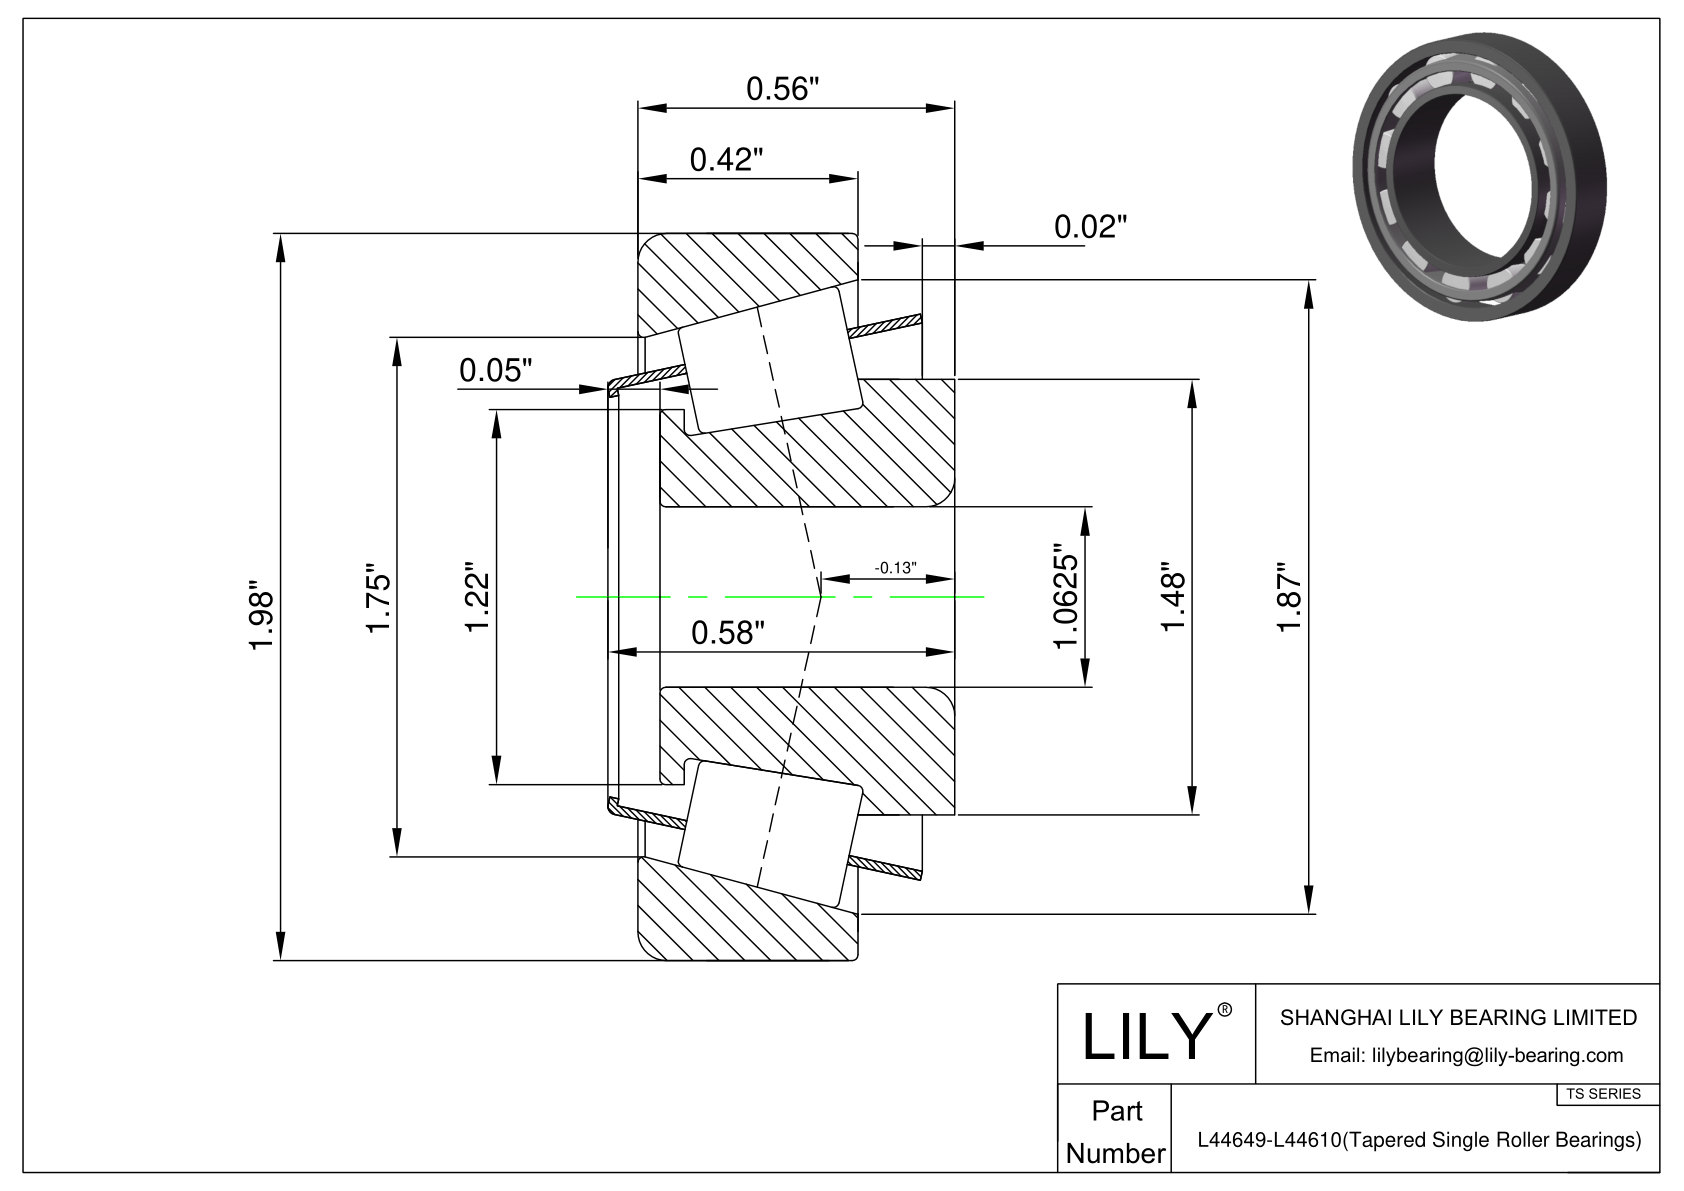 L44649-L44610 TS (Tapered Single Roller Bearings) (Imperial) cad drawing